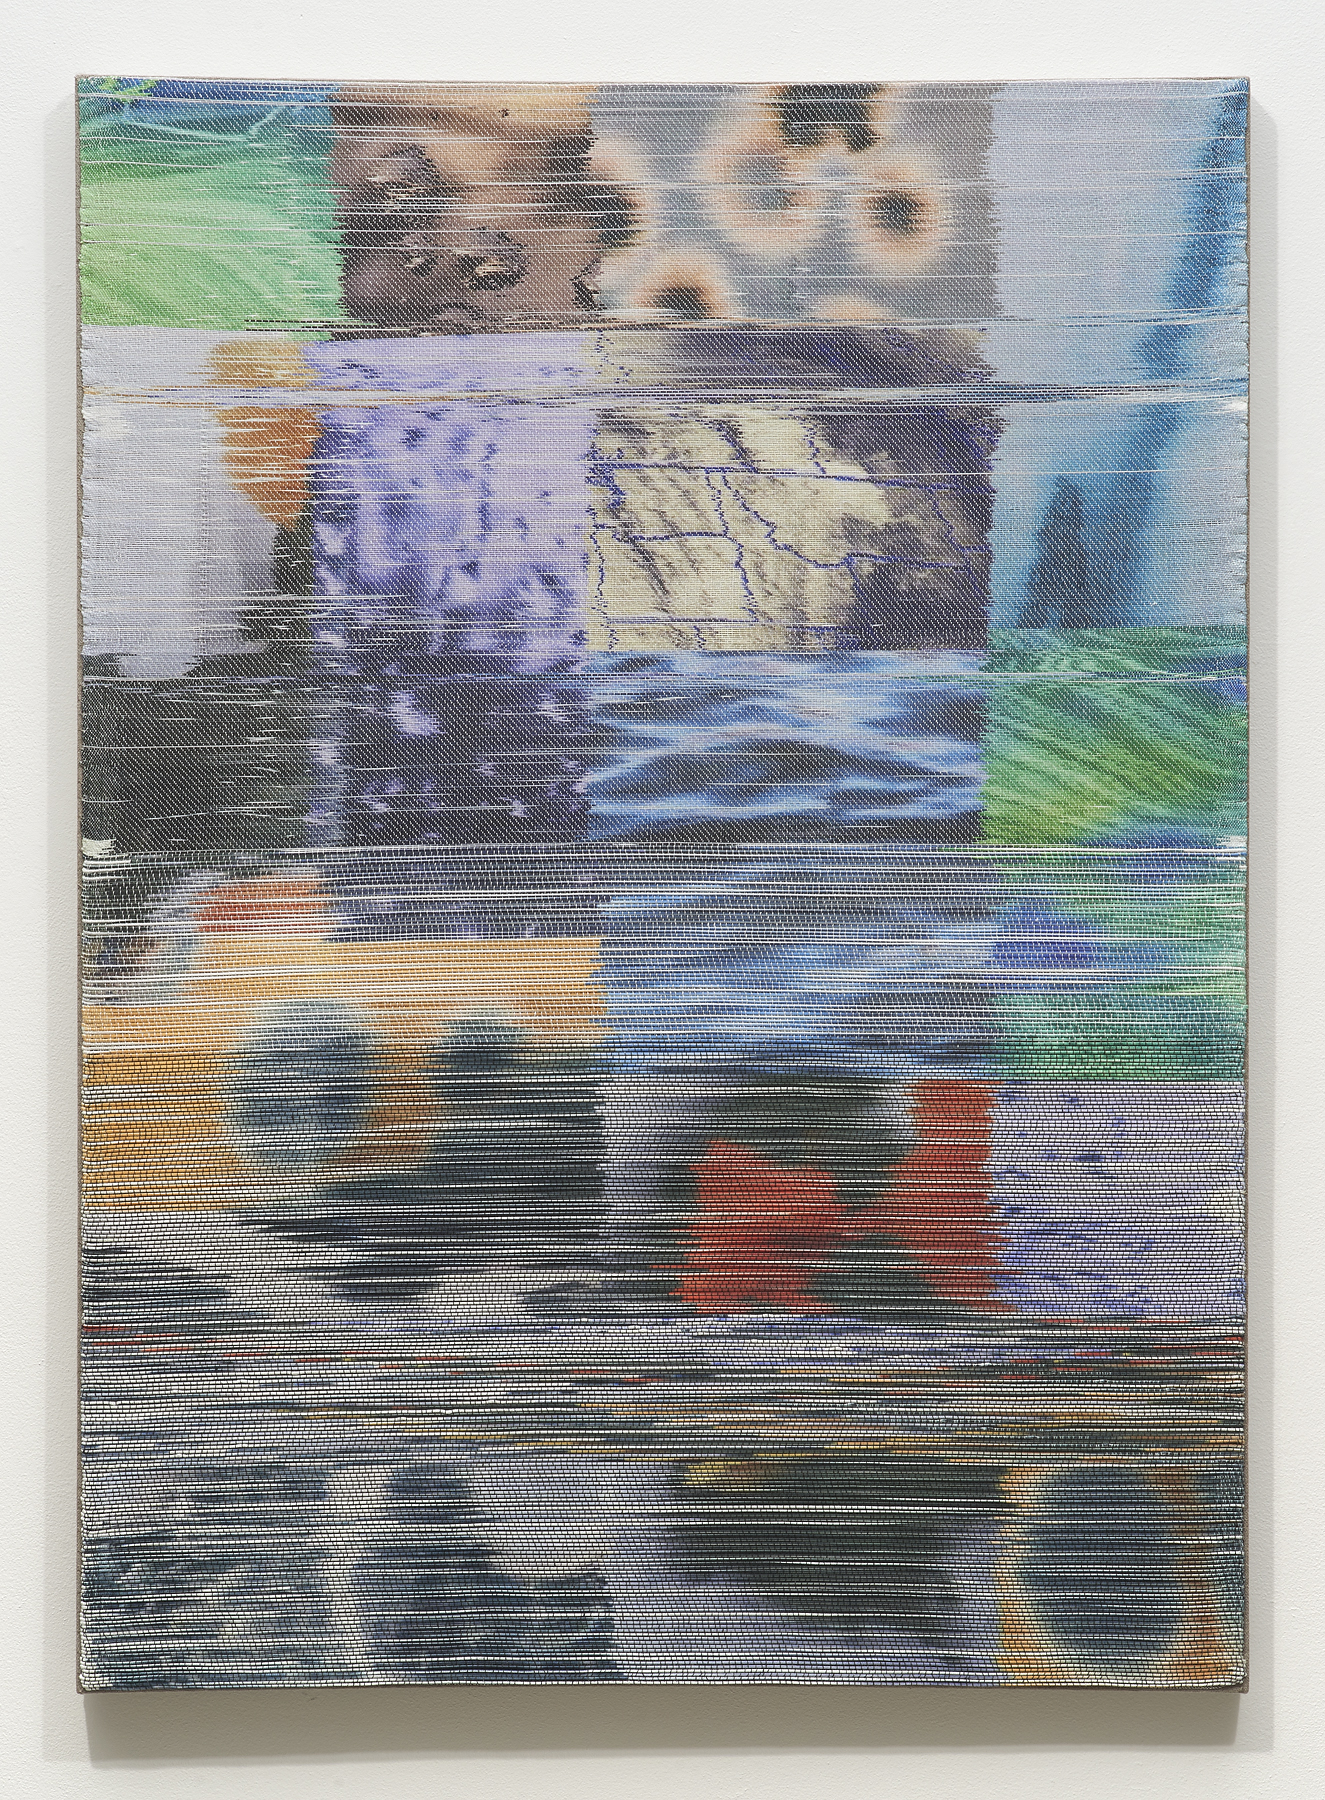  Margo Wolowiec,  Purple Rain II , 2018, Handwoven polymer, linen, dye sublimation ink, 51 x 37 inches 